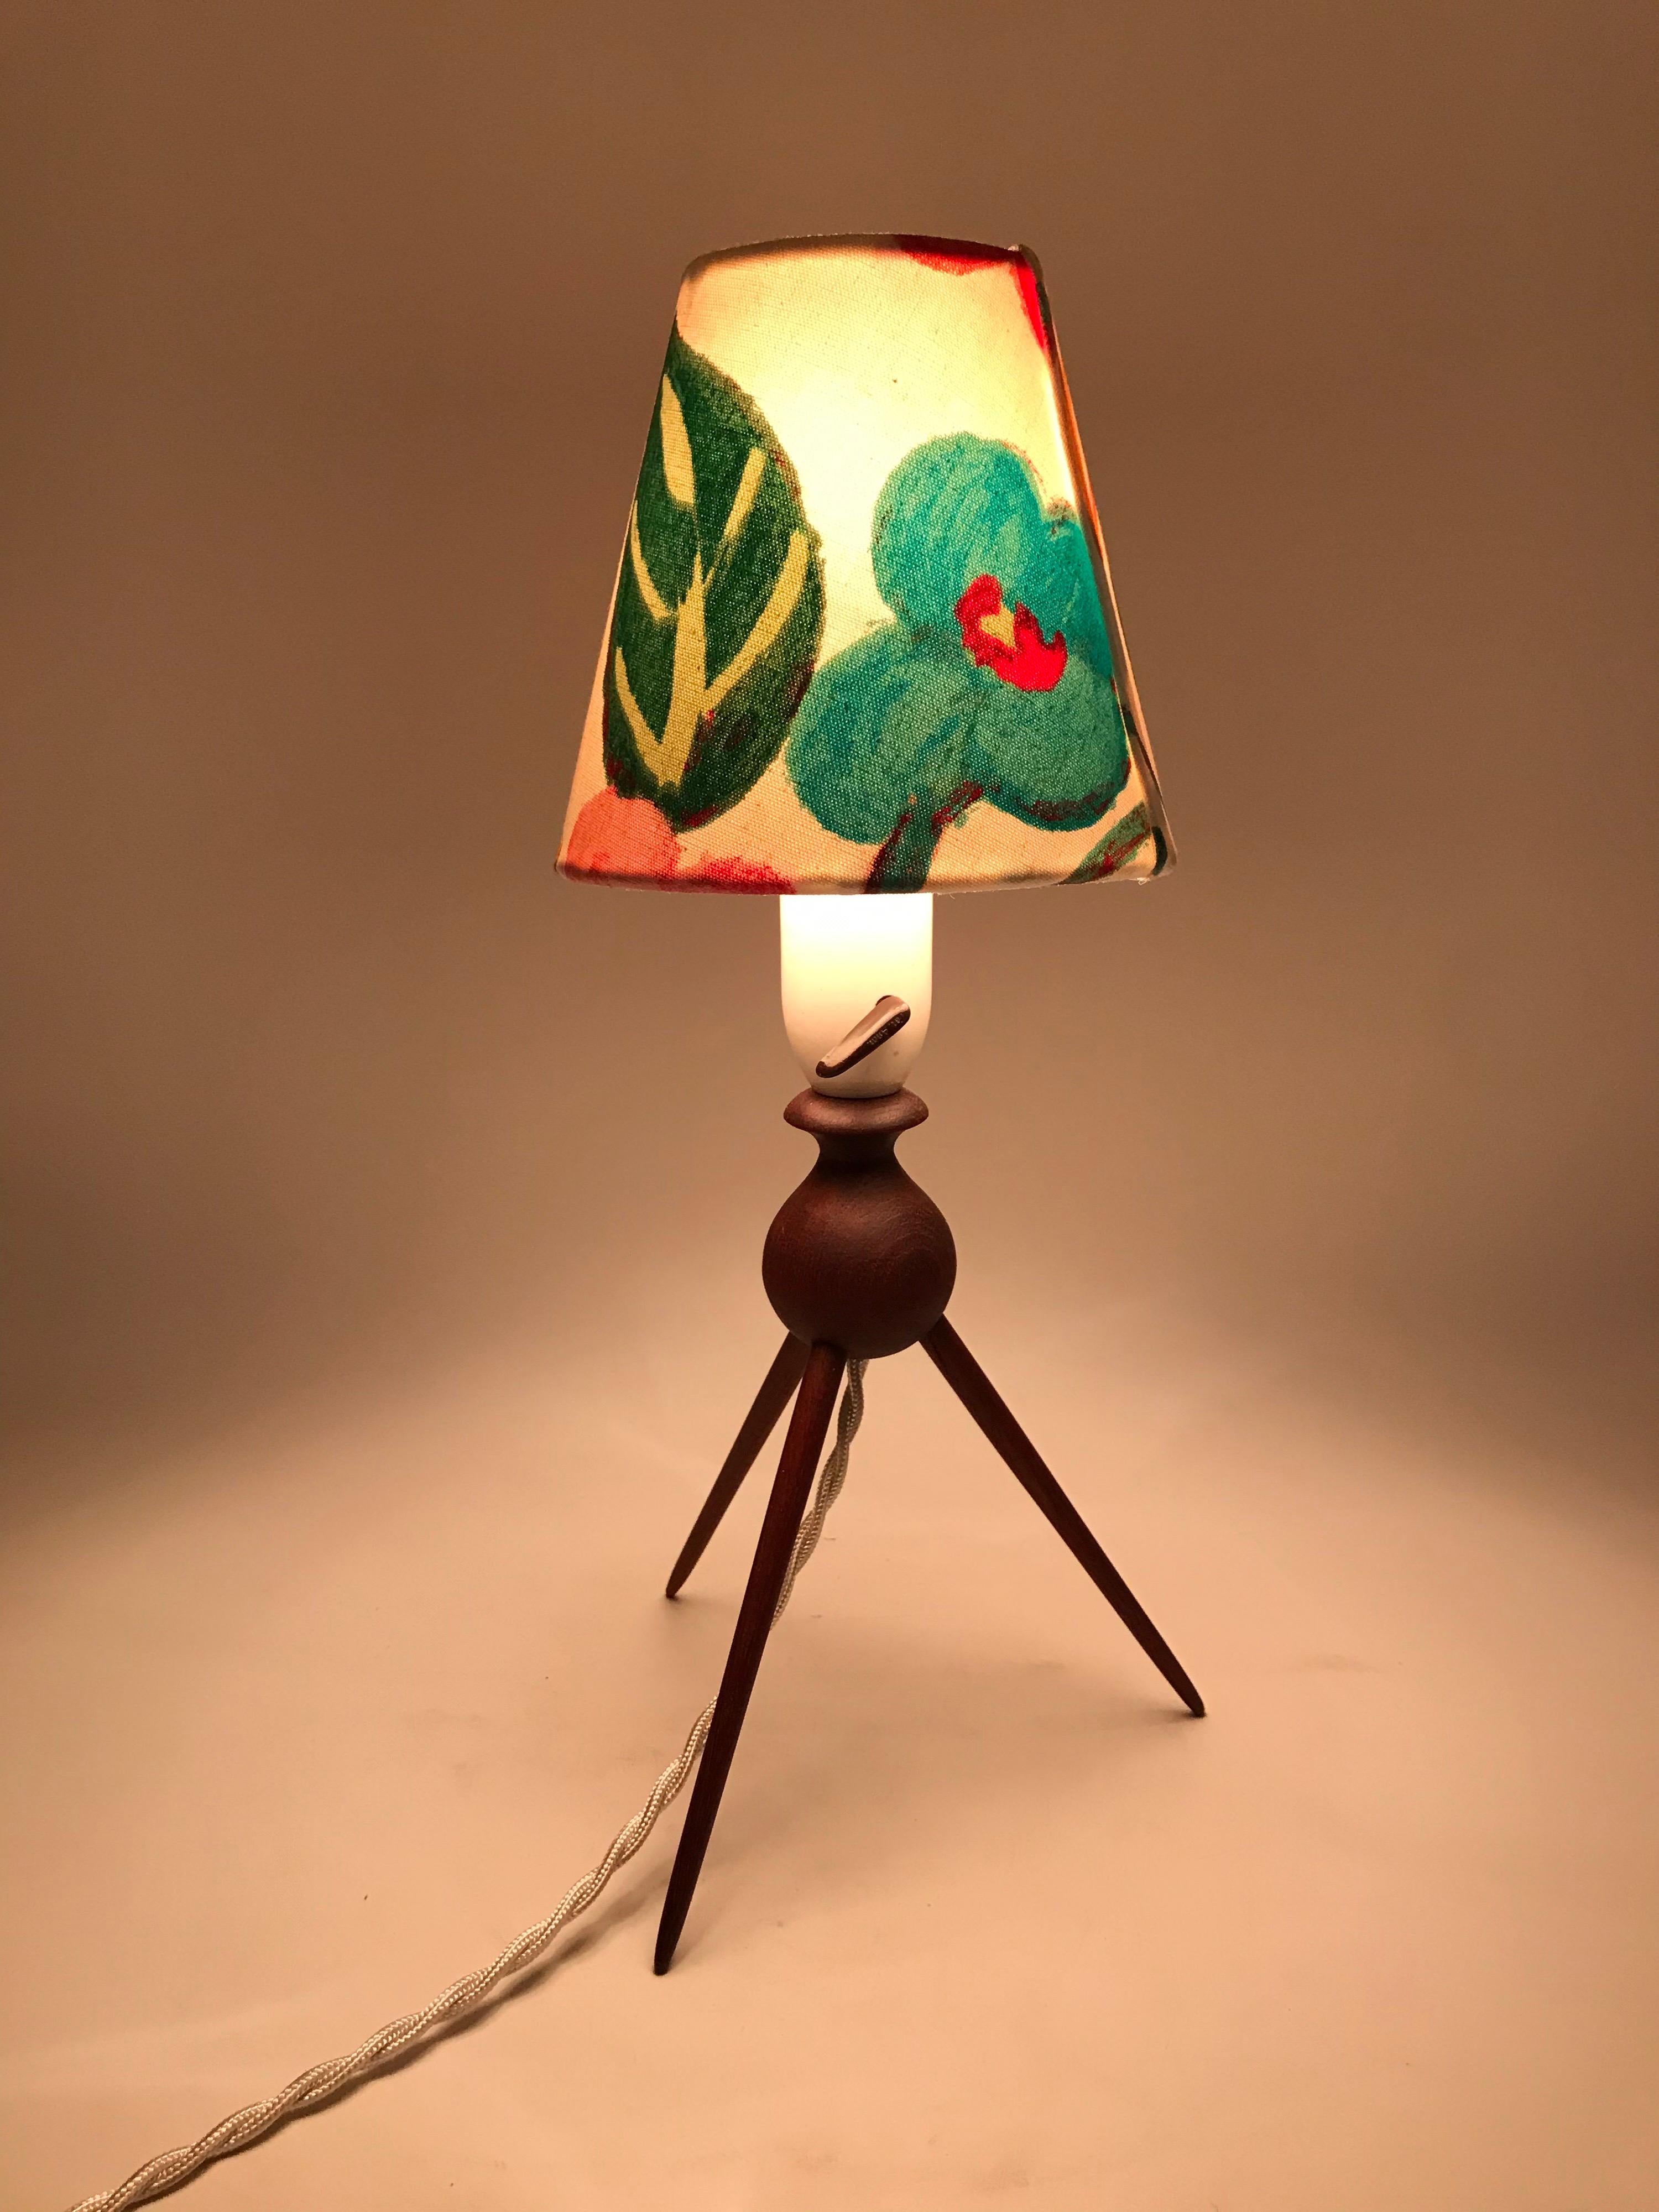 Danish Mid-Century Modern teak table lamp with a beautiful limited edition lampshade from ArtbyMaj.
This solid teak lamp sits on 3 turned legs.
It still has the original Bakelite bulb holder and is rewired.
A plug can be fitted for the Eu or US